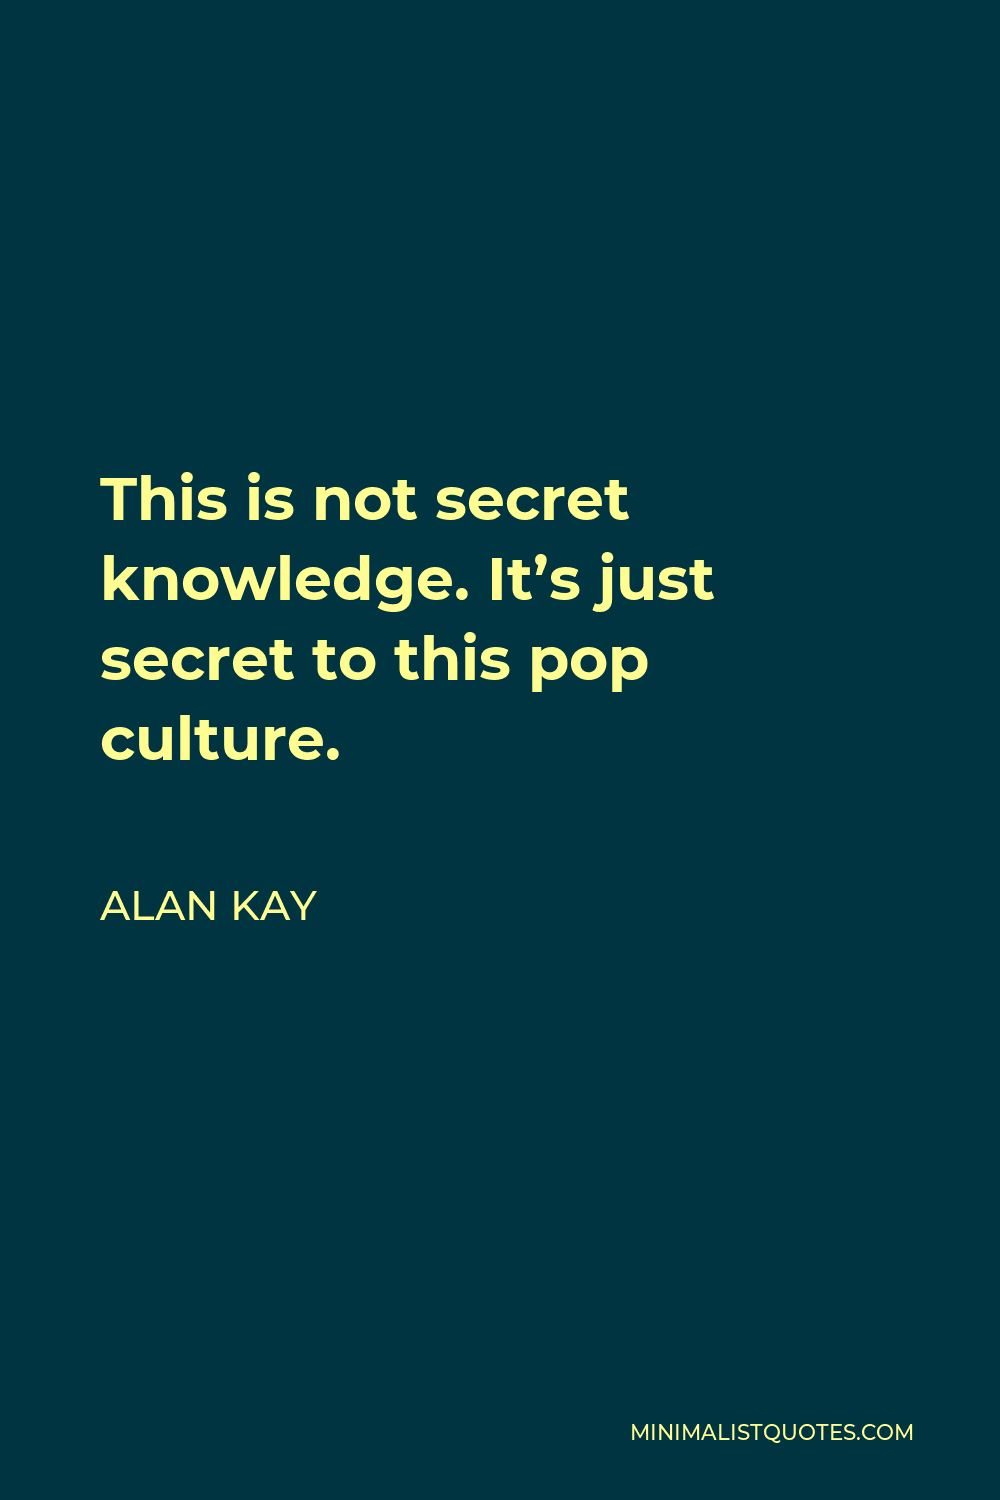 Alan Kay Quote - This is not secret knowledge. It’s just secret to this pop culture.